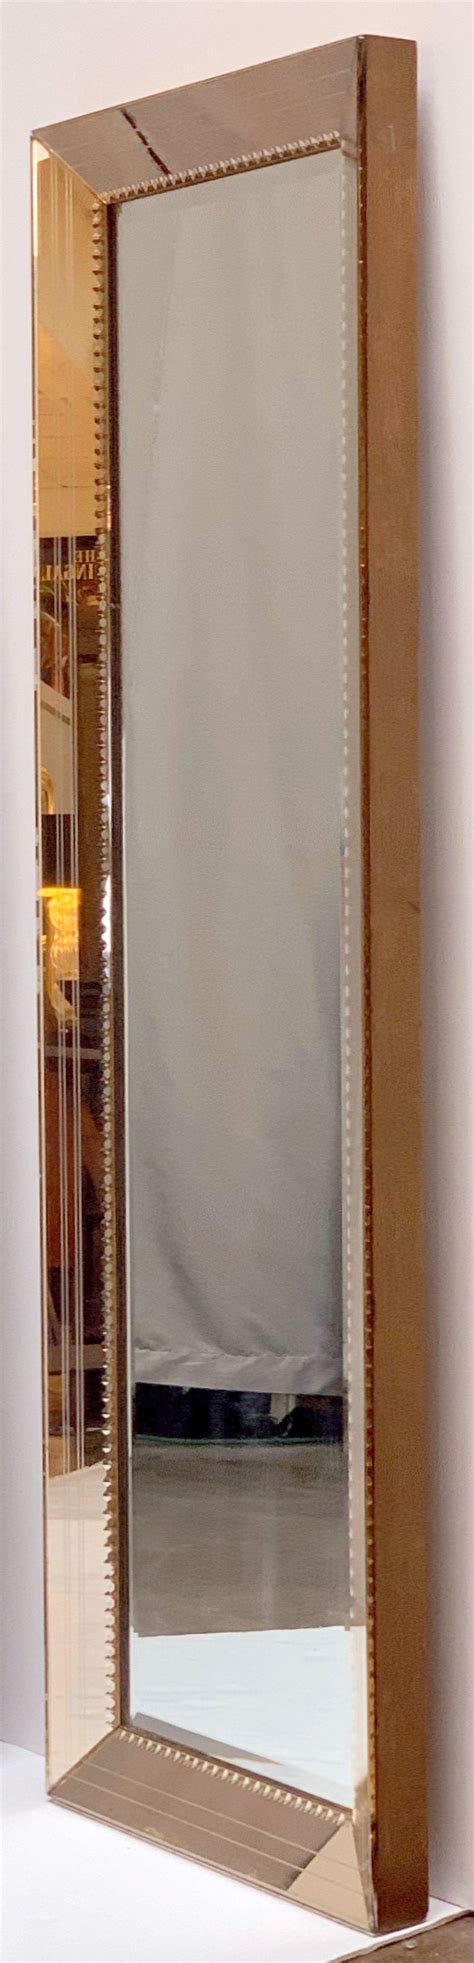 Art Deco Mirror With Beveled Frame Of Copper Colored Glass H 58 3 4 X